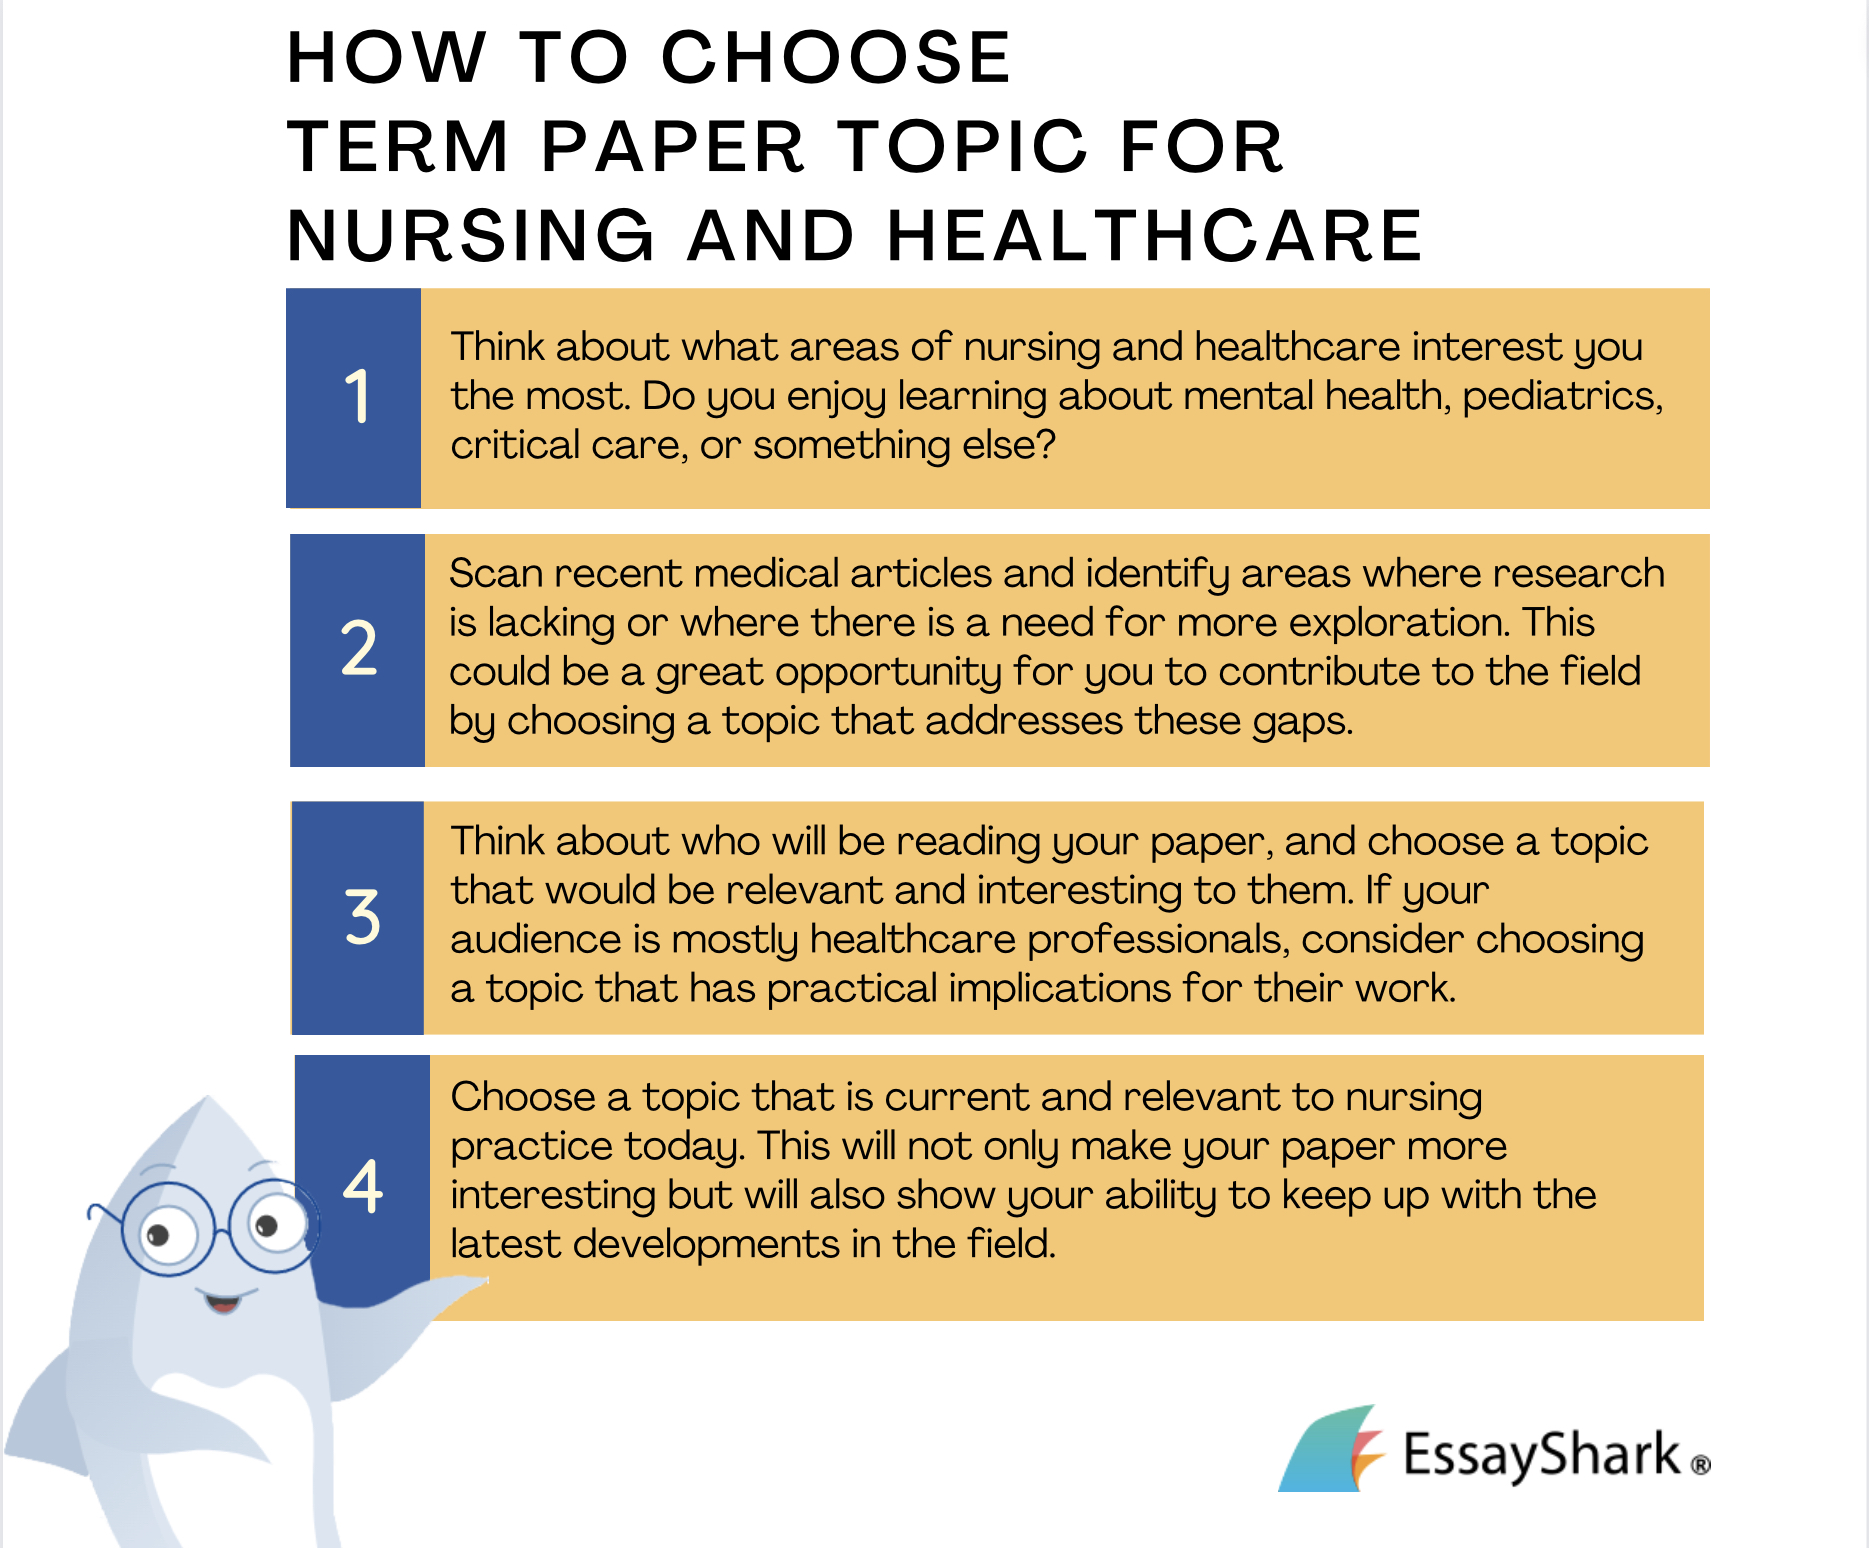 How to choose term paper topic for nursing and healthcare